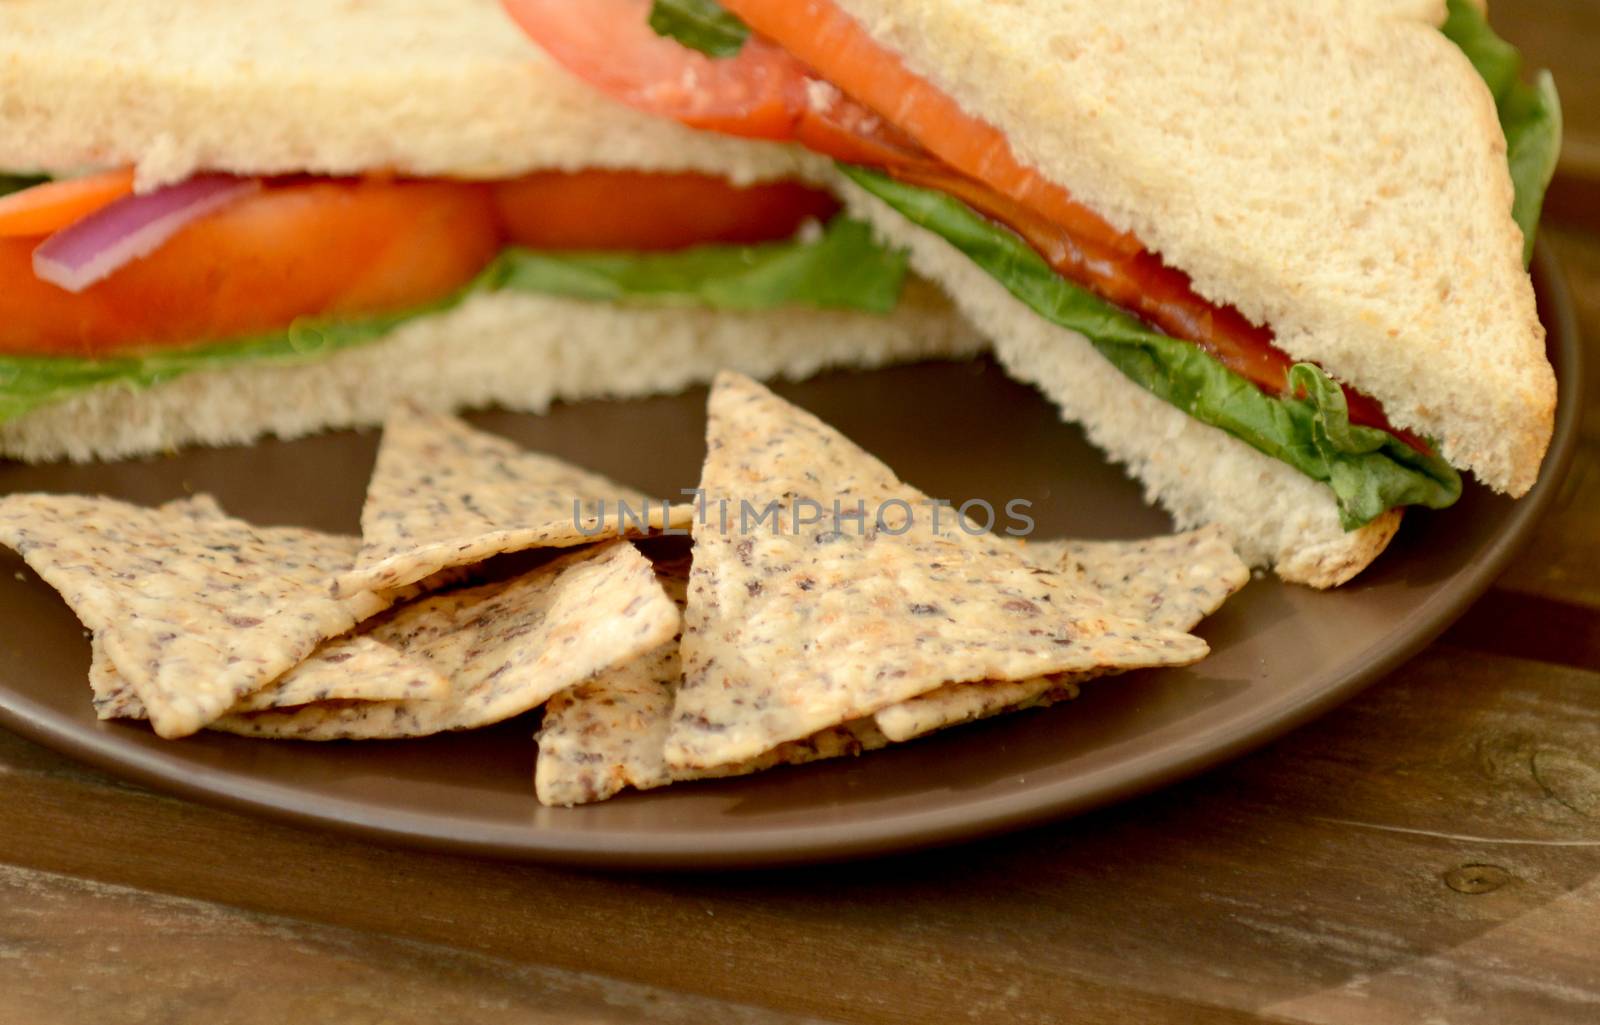 tortilla chips and vegan sandwich by ftlaudgirl